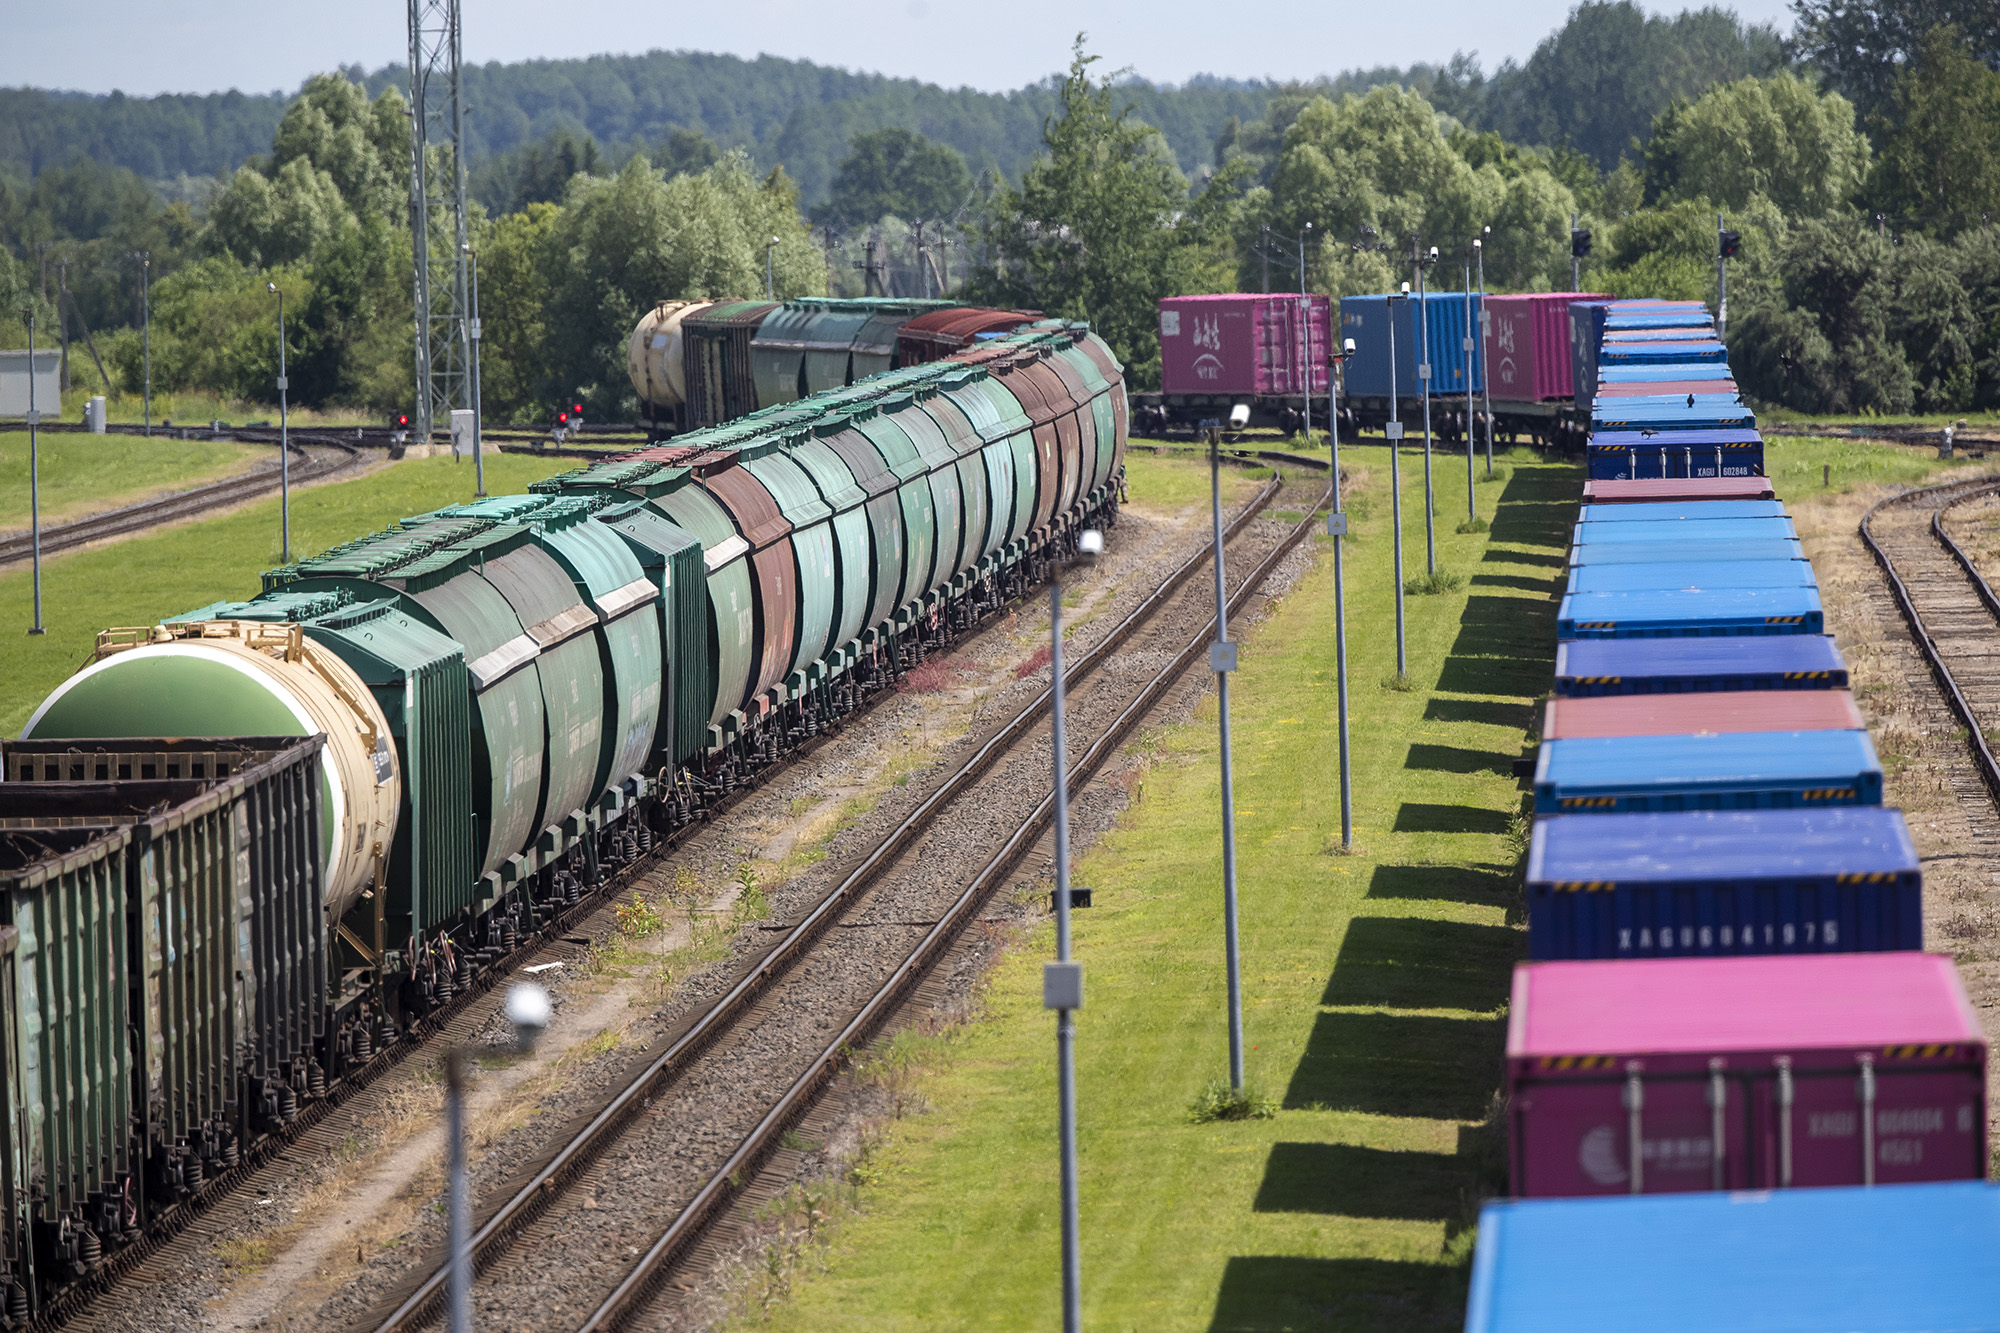 Freight train cars from the Russian enclave of Kaliningrad are seen at the border railway station in Kybartai, some 200 kms (124 miles) west of the capital Vilnius, Lithuania, on June 22.